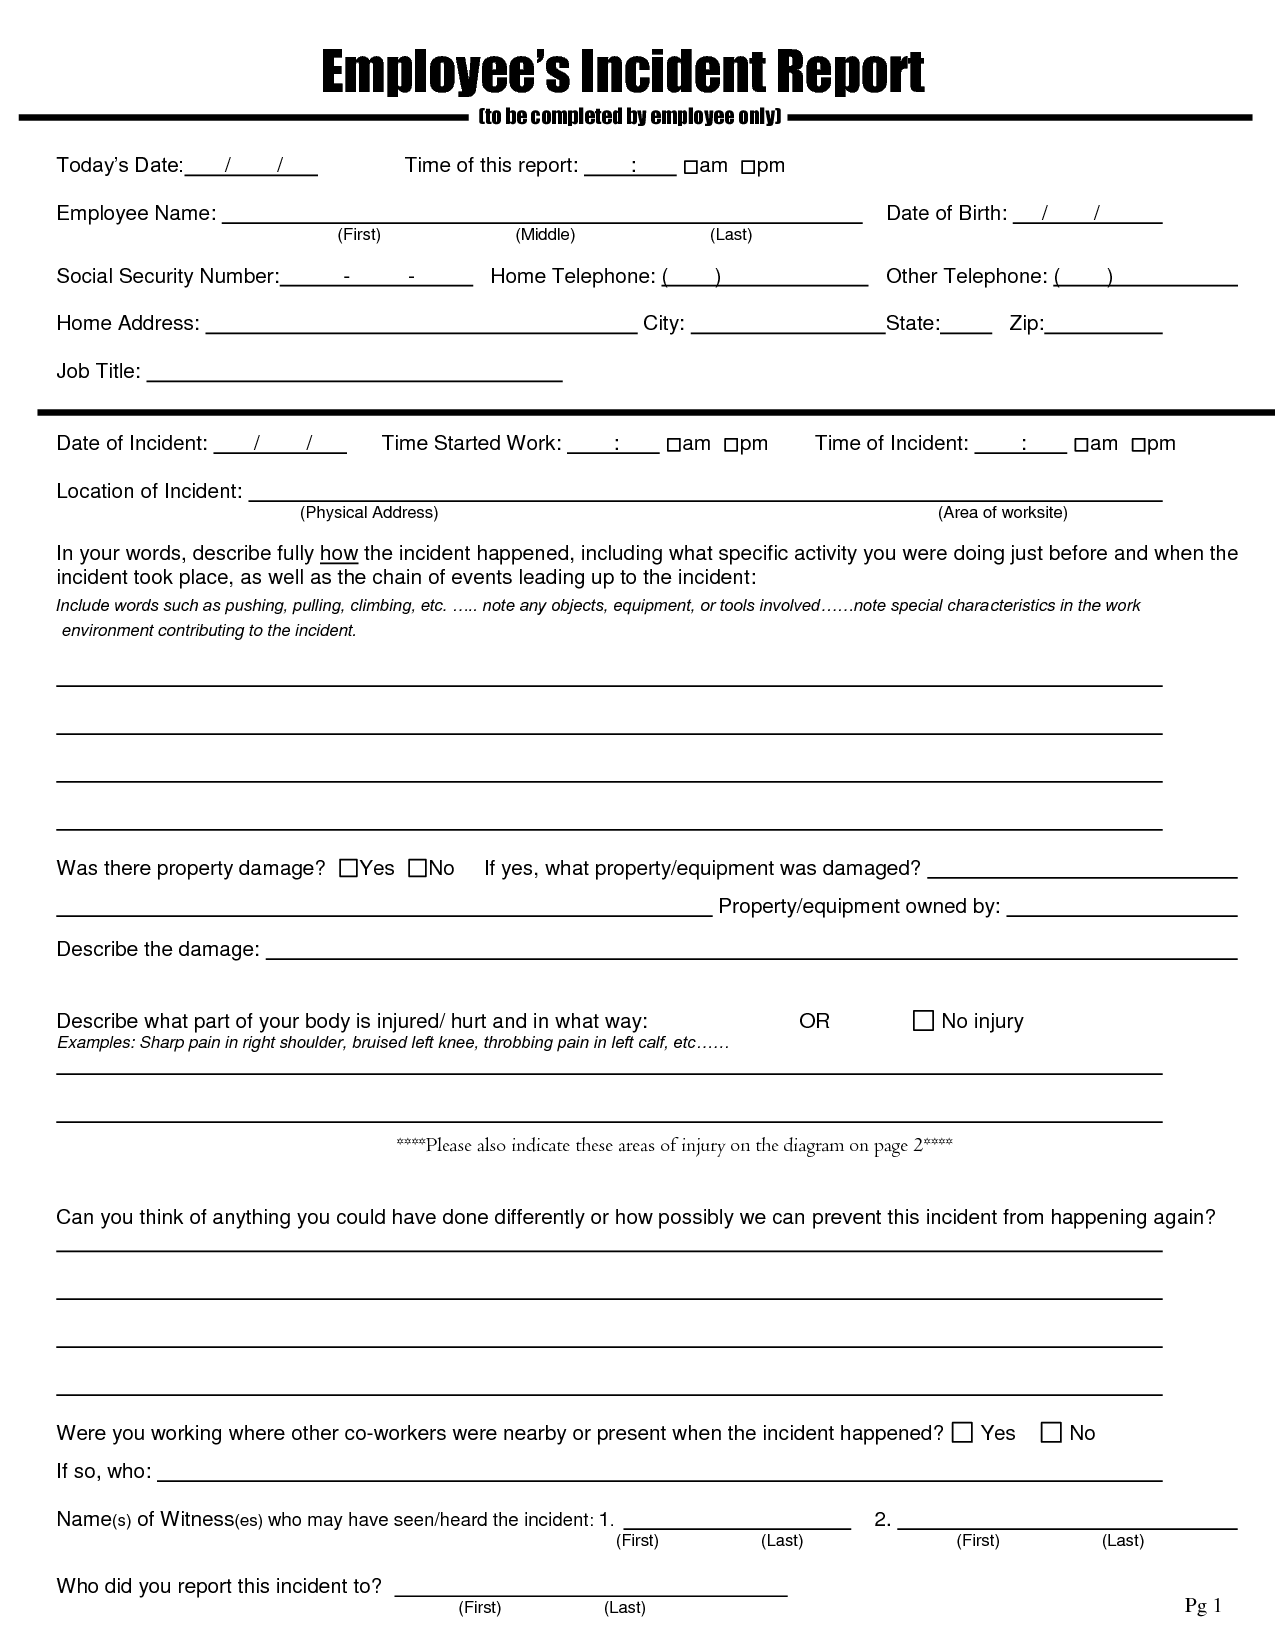 sample employee incident report form   Boat.jeremyeaton.co